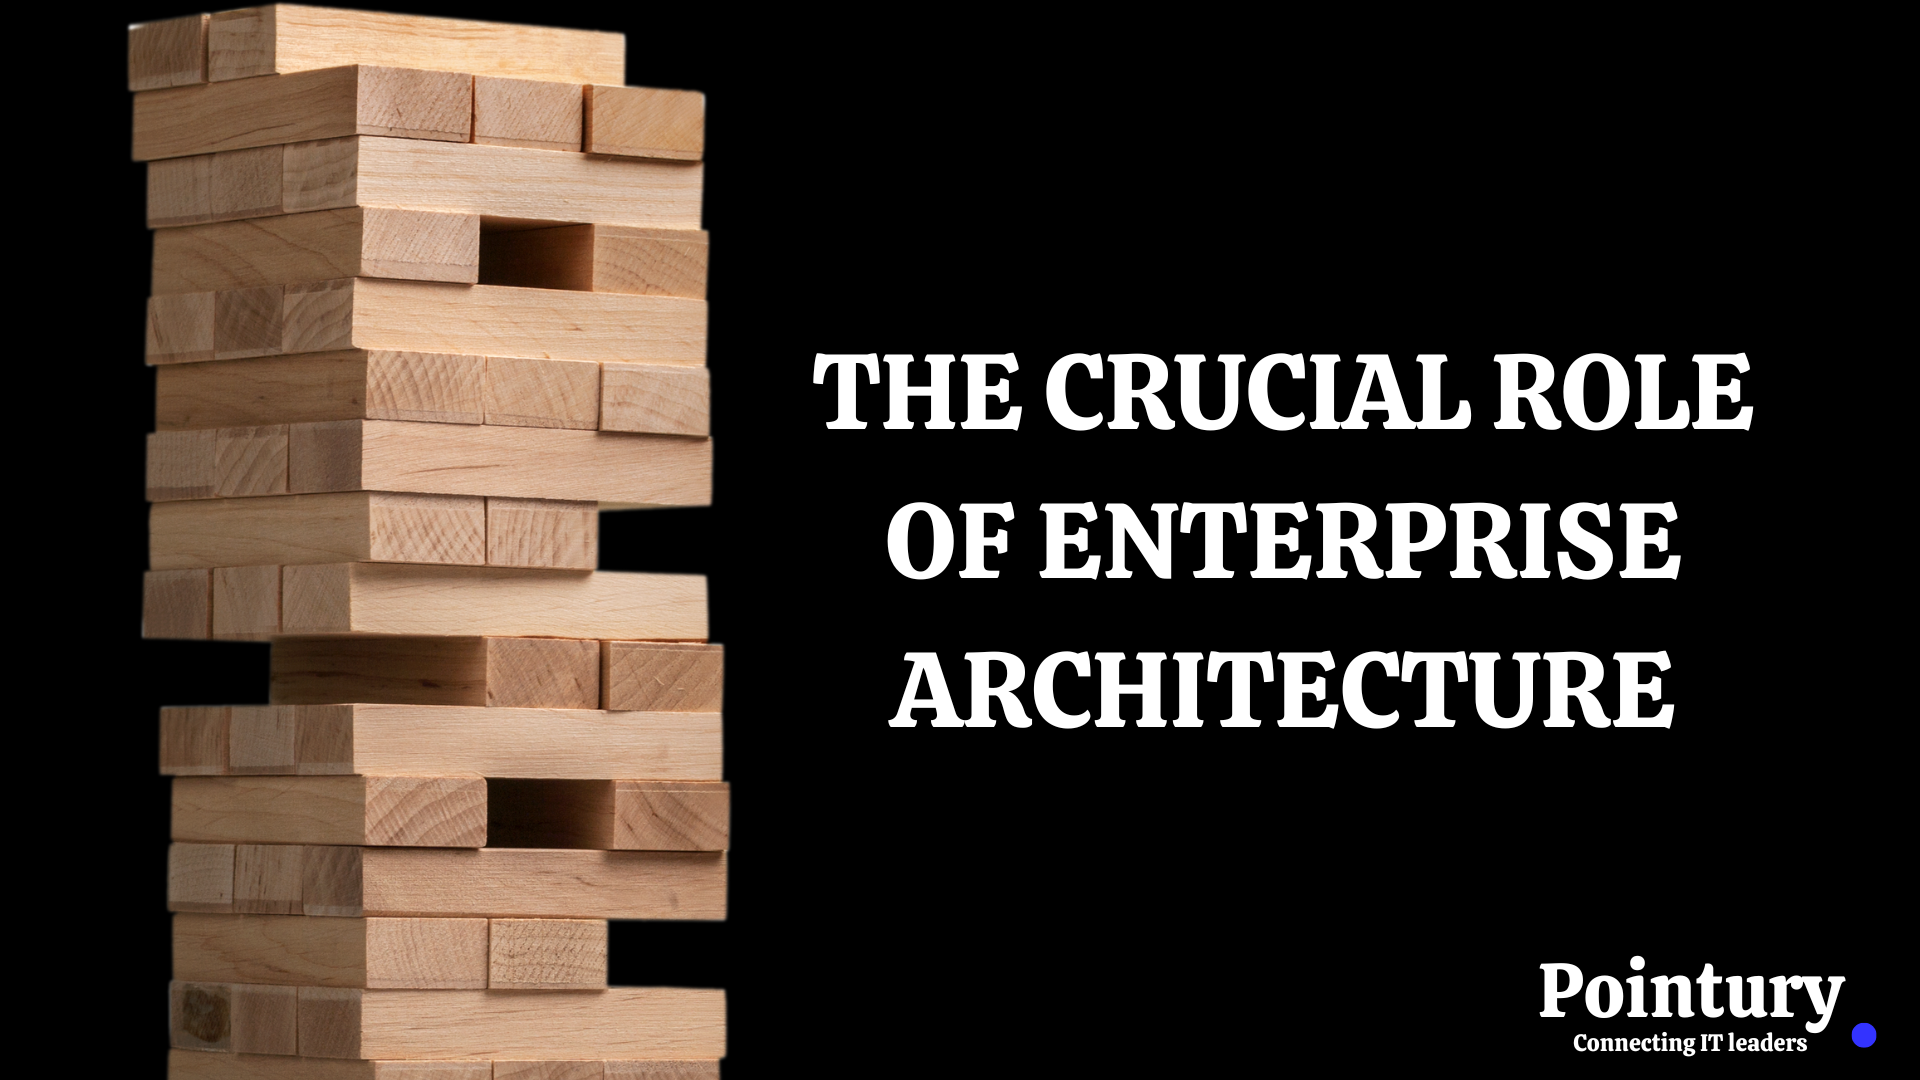 THE CRUCIAL ROLE OF ENTERPRISE ARCHITECTURE